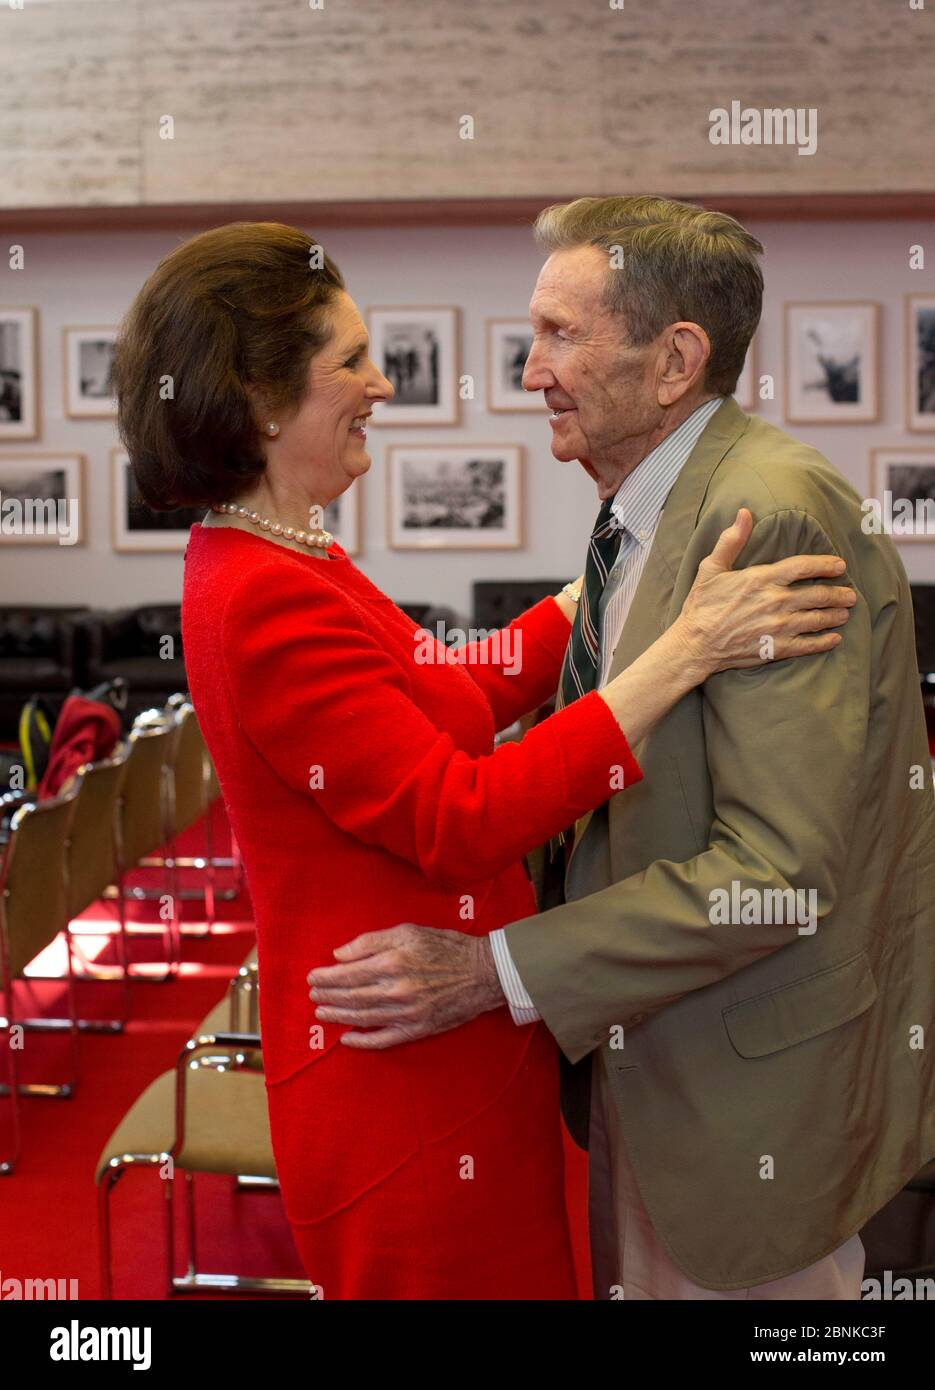 Austin, Texas USA, November 2012: Former U.S. Attorney General, lawyer and activist Ramsey Clark (r) pays a surprise visit to President Lyndon B. Johnson's daughter Lynda Johnson Robb (l) at the LBJ Library.  Clark, 84, was President Lyndon B. Johnson's attorney general from 1967 to 1969. ©Bob Daemmrich Stock Photo